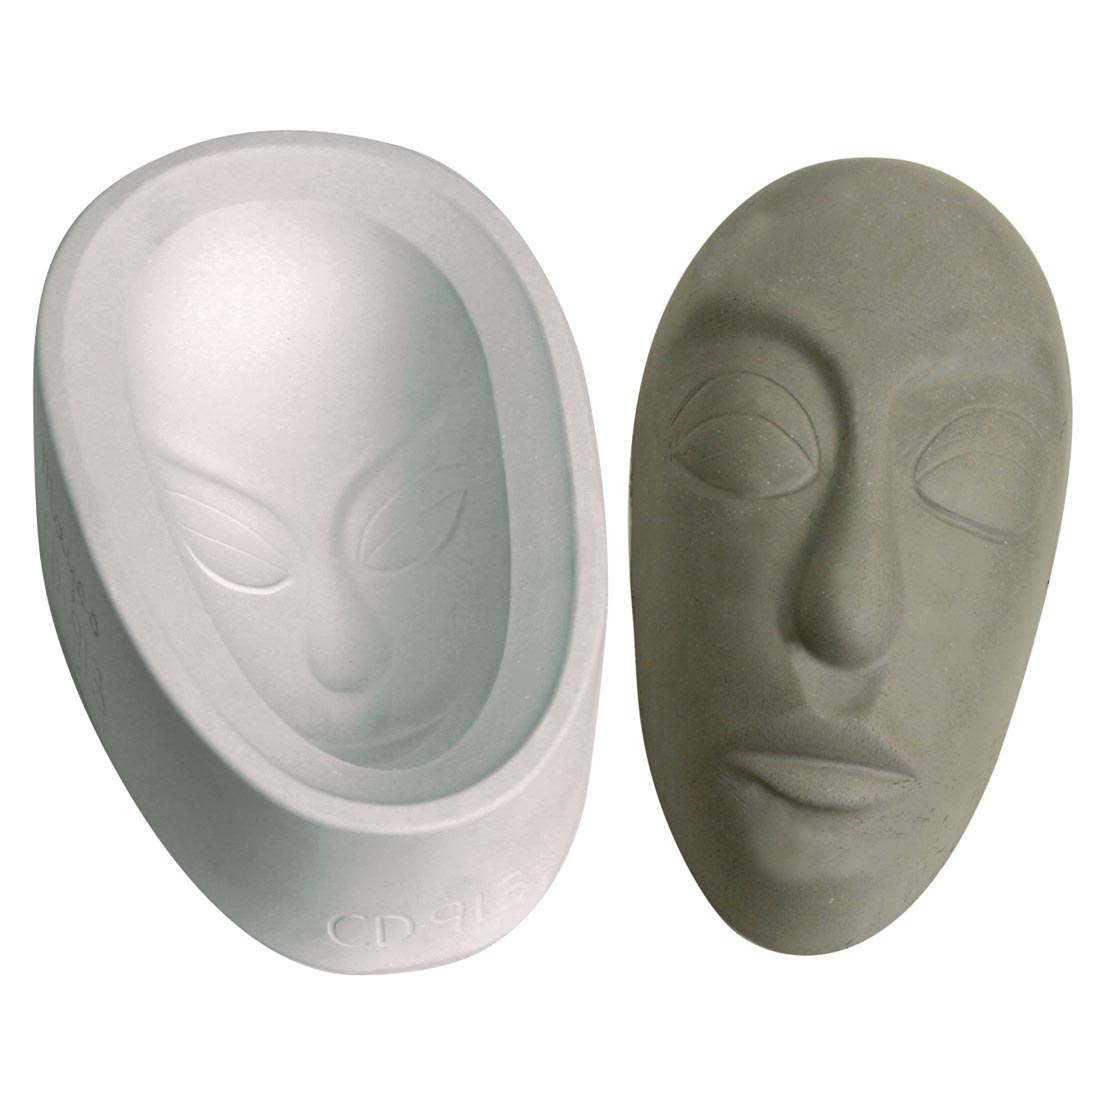 Mayco African Mask Plain Mold with sample clay face